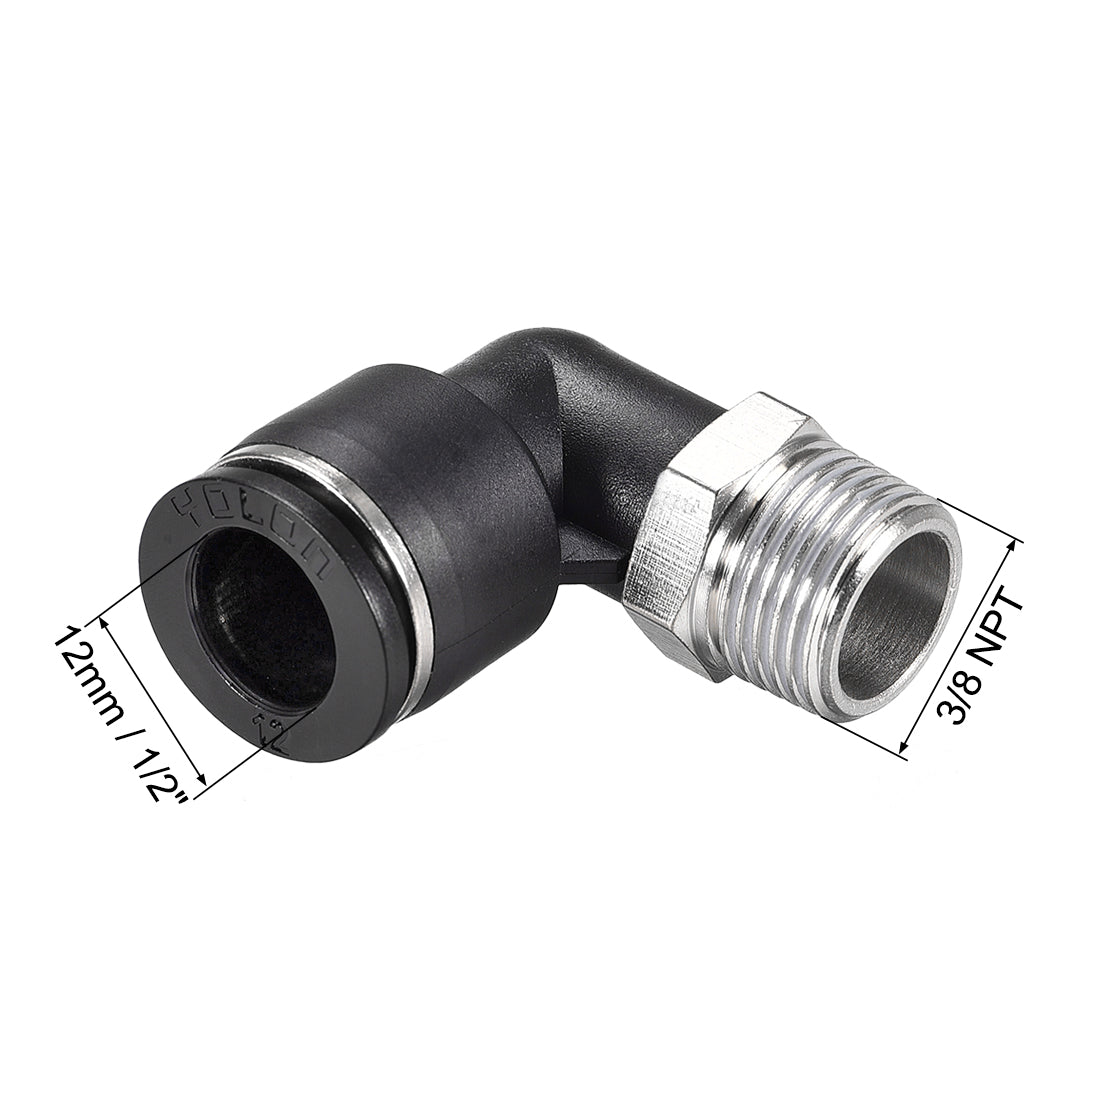 uxcell Uxcell Push to Connect Tube Fitting Male Elbow 12mm Tube OD x 3/8 NPT Thread Pneumatic Air Push Fit Lock Fitting 2pcs